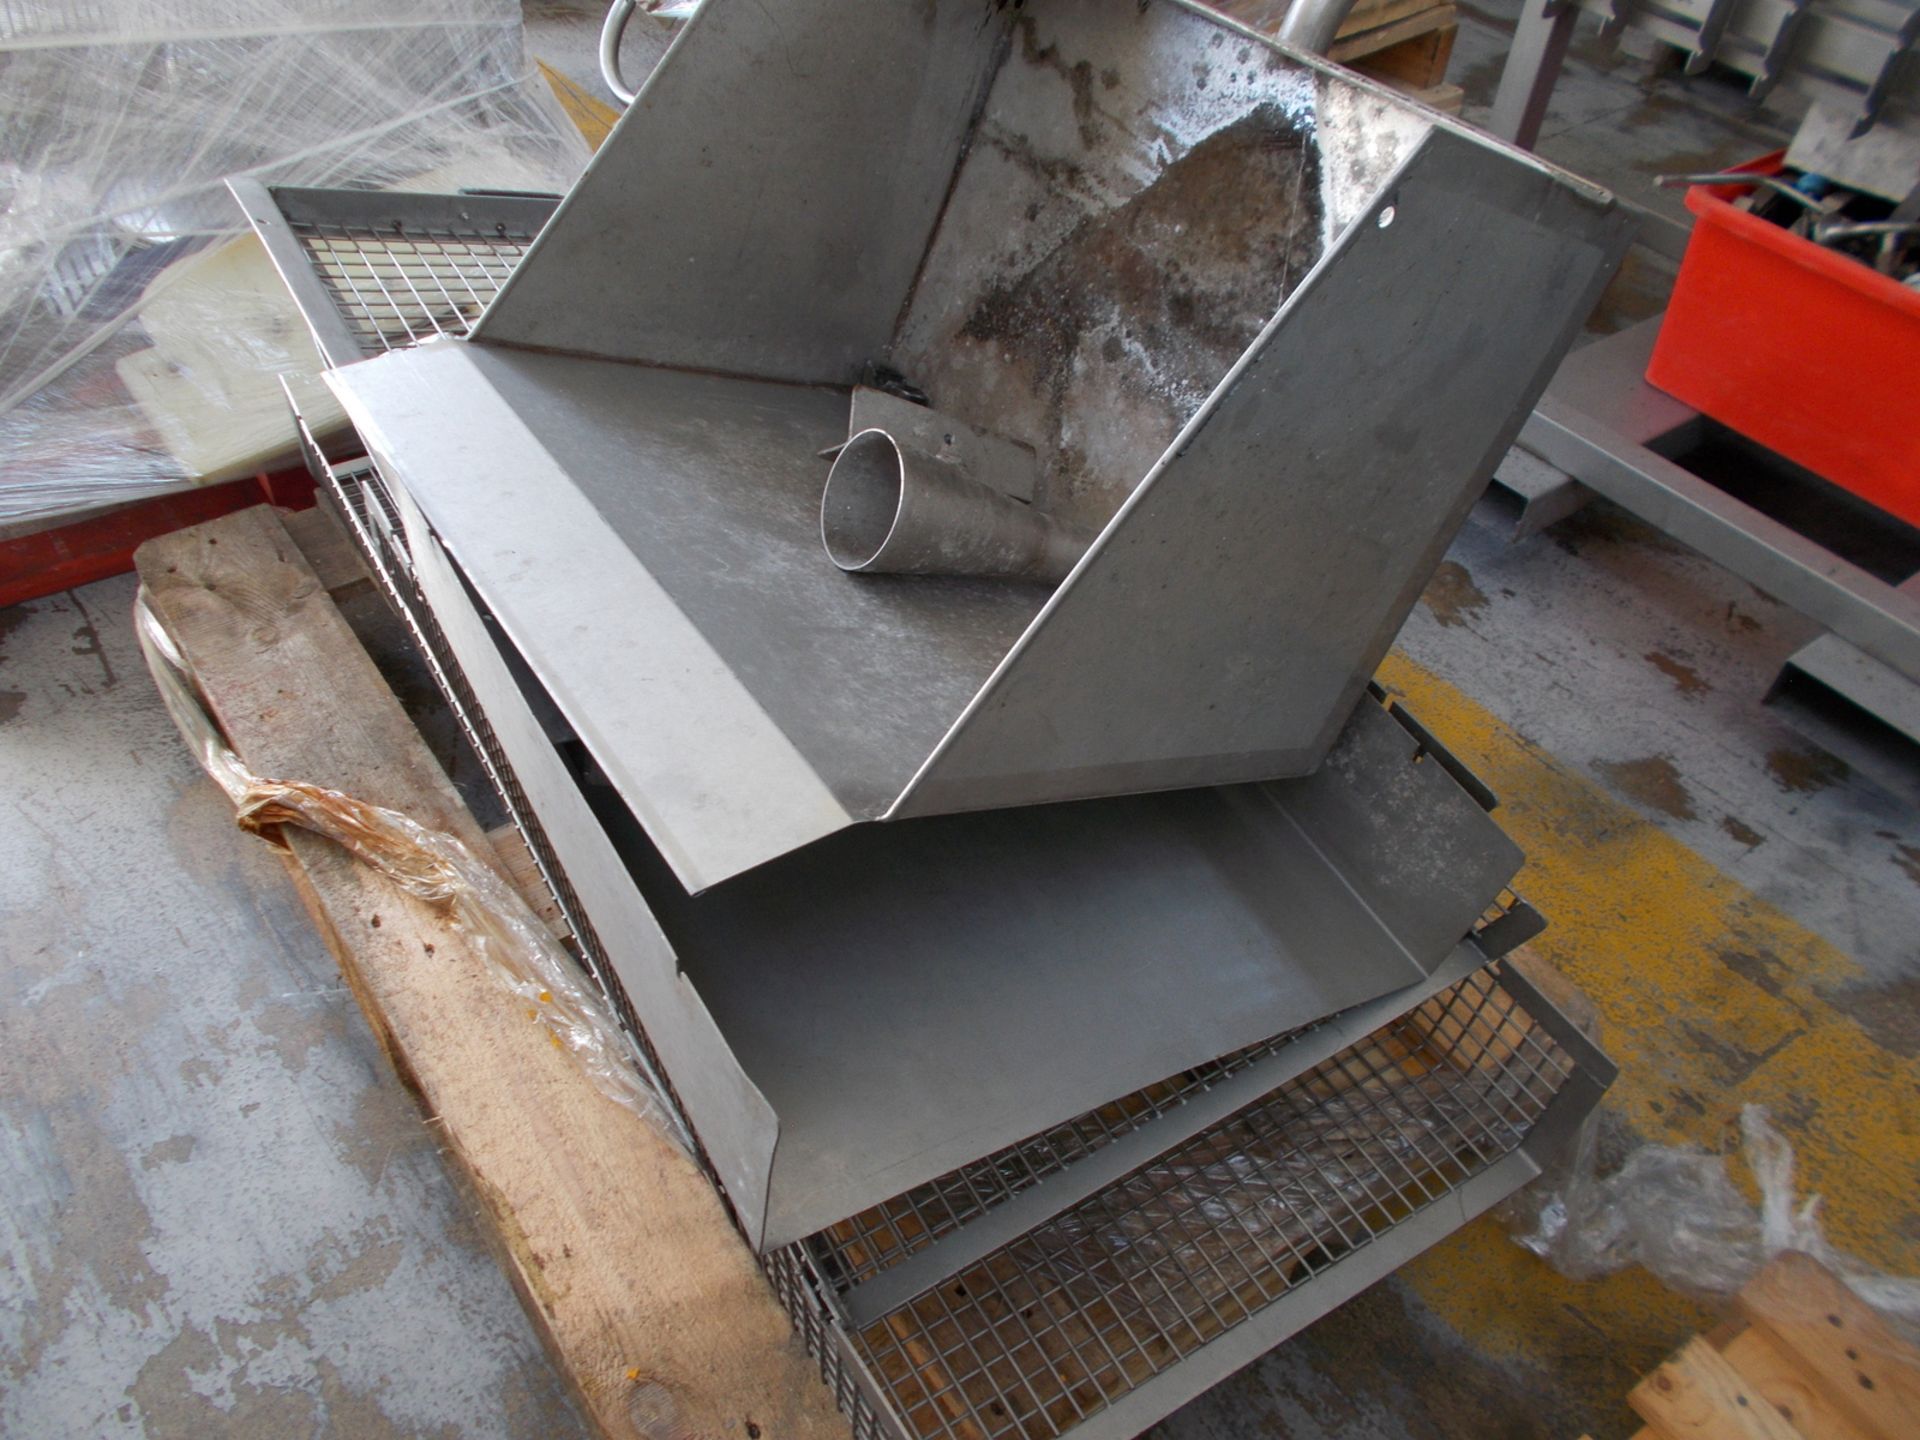 Sieve spares and conveyor guarding - Image 4 of 5